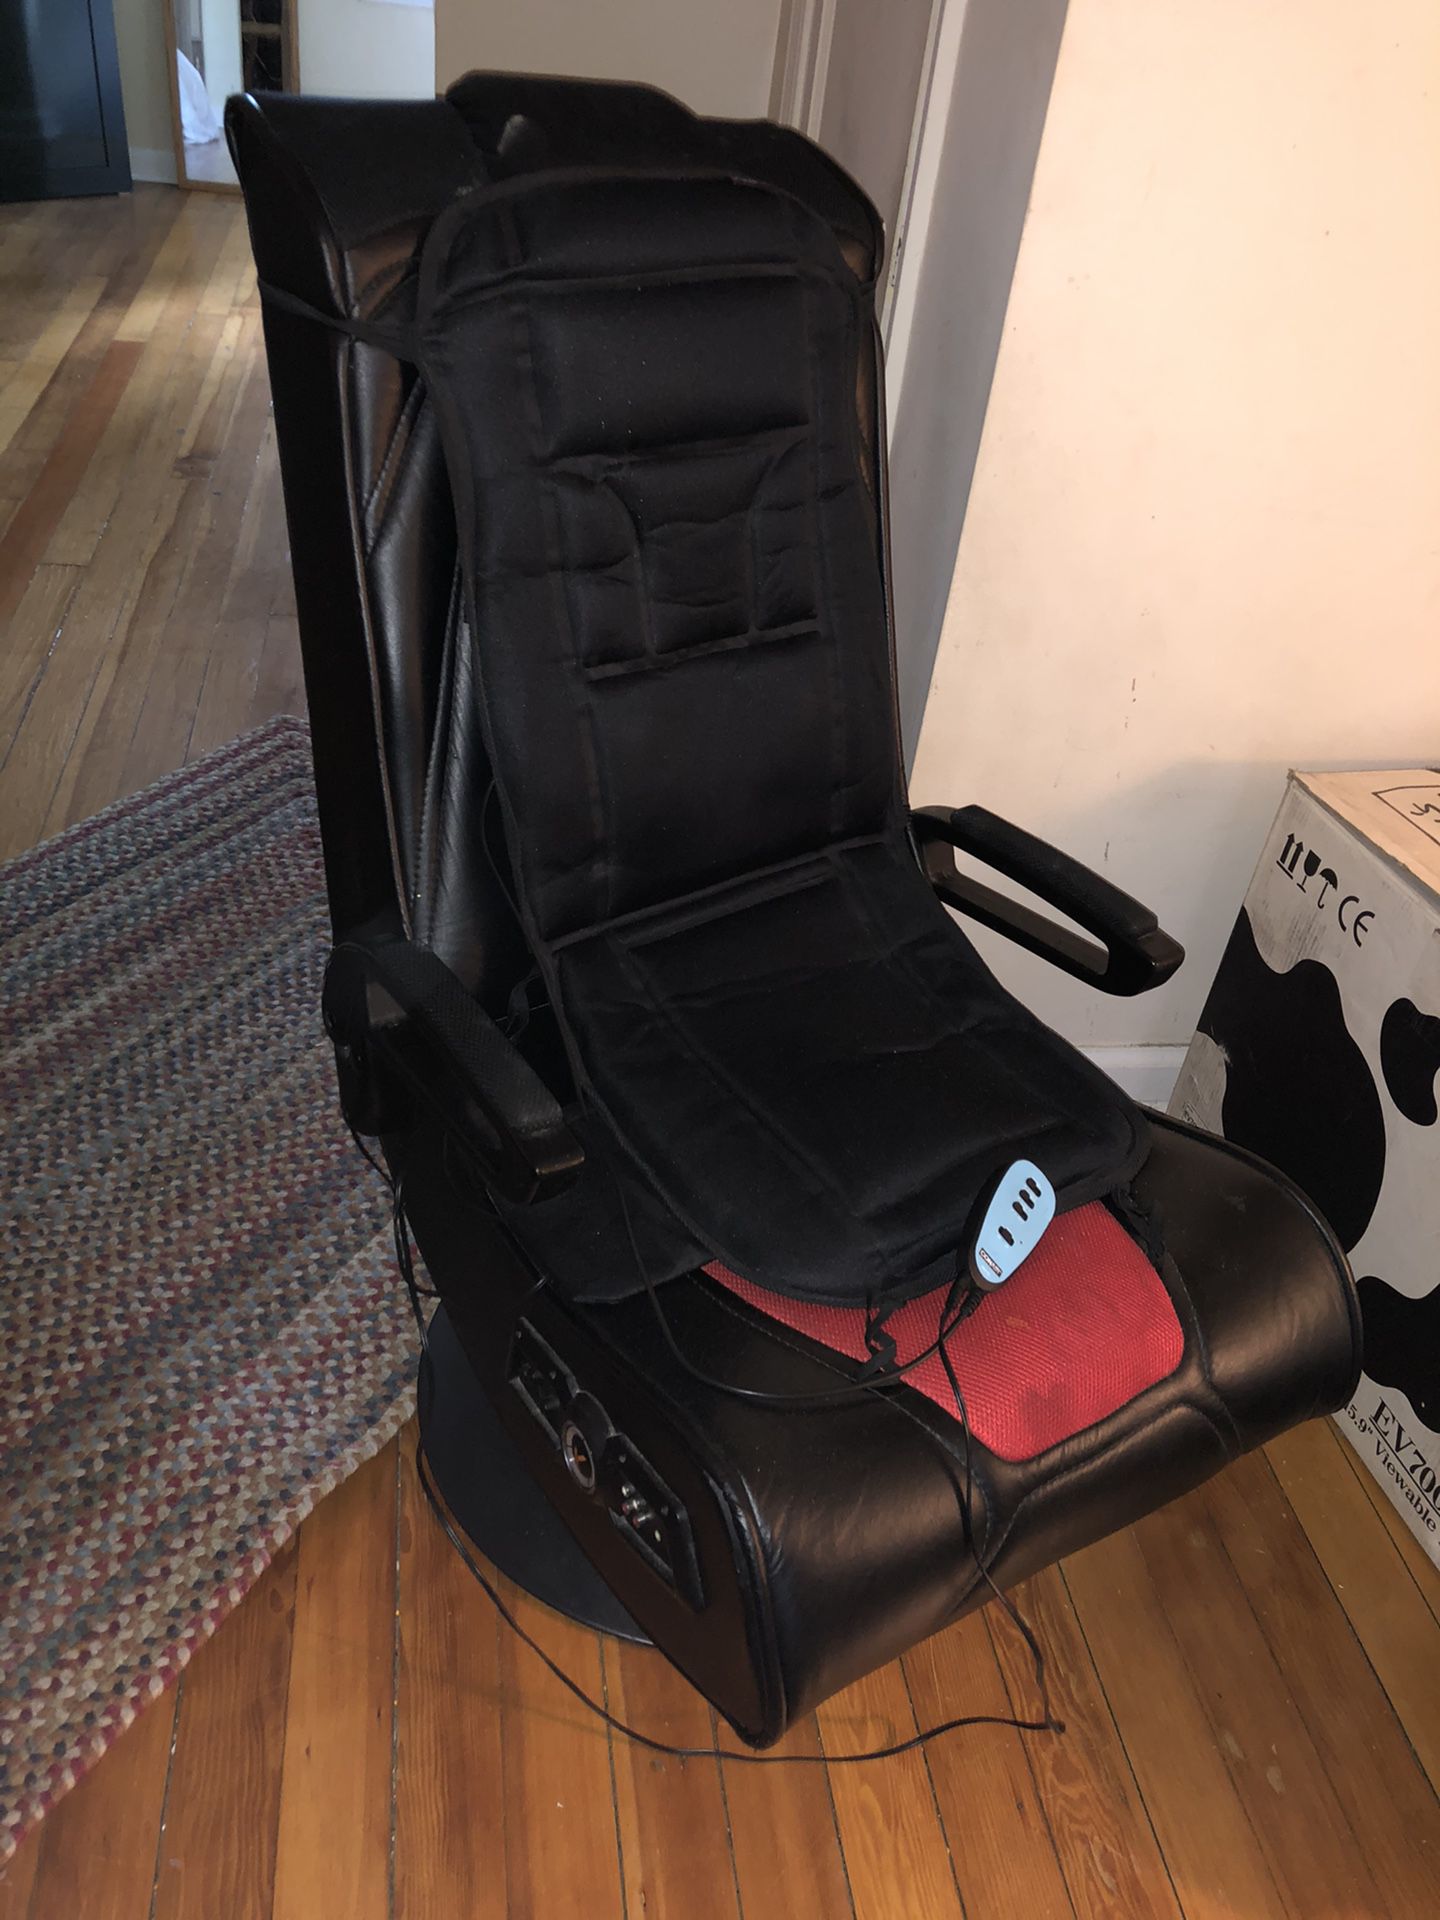 Gaming chair and massage/heat pad